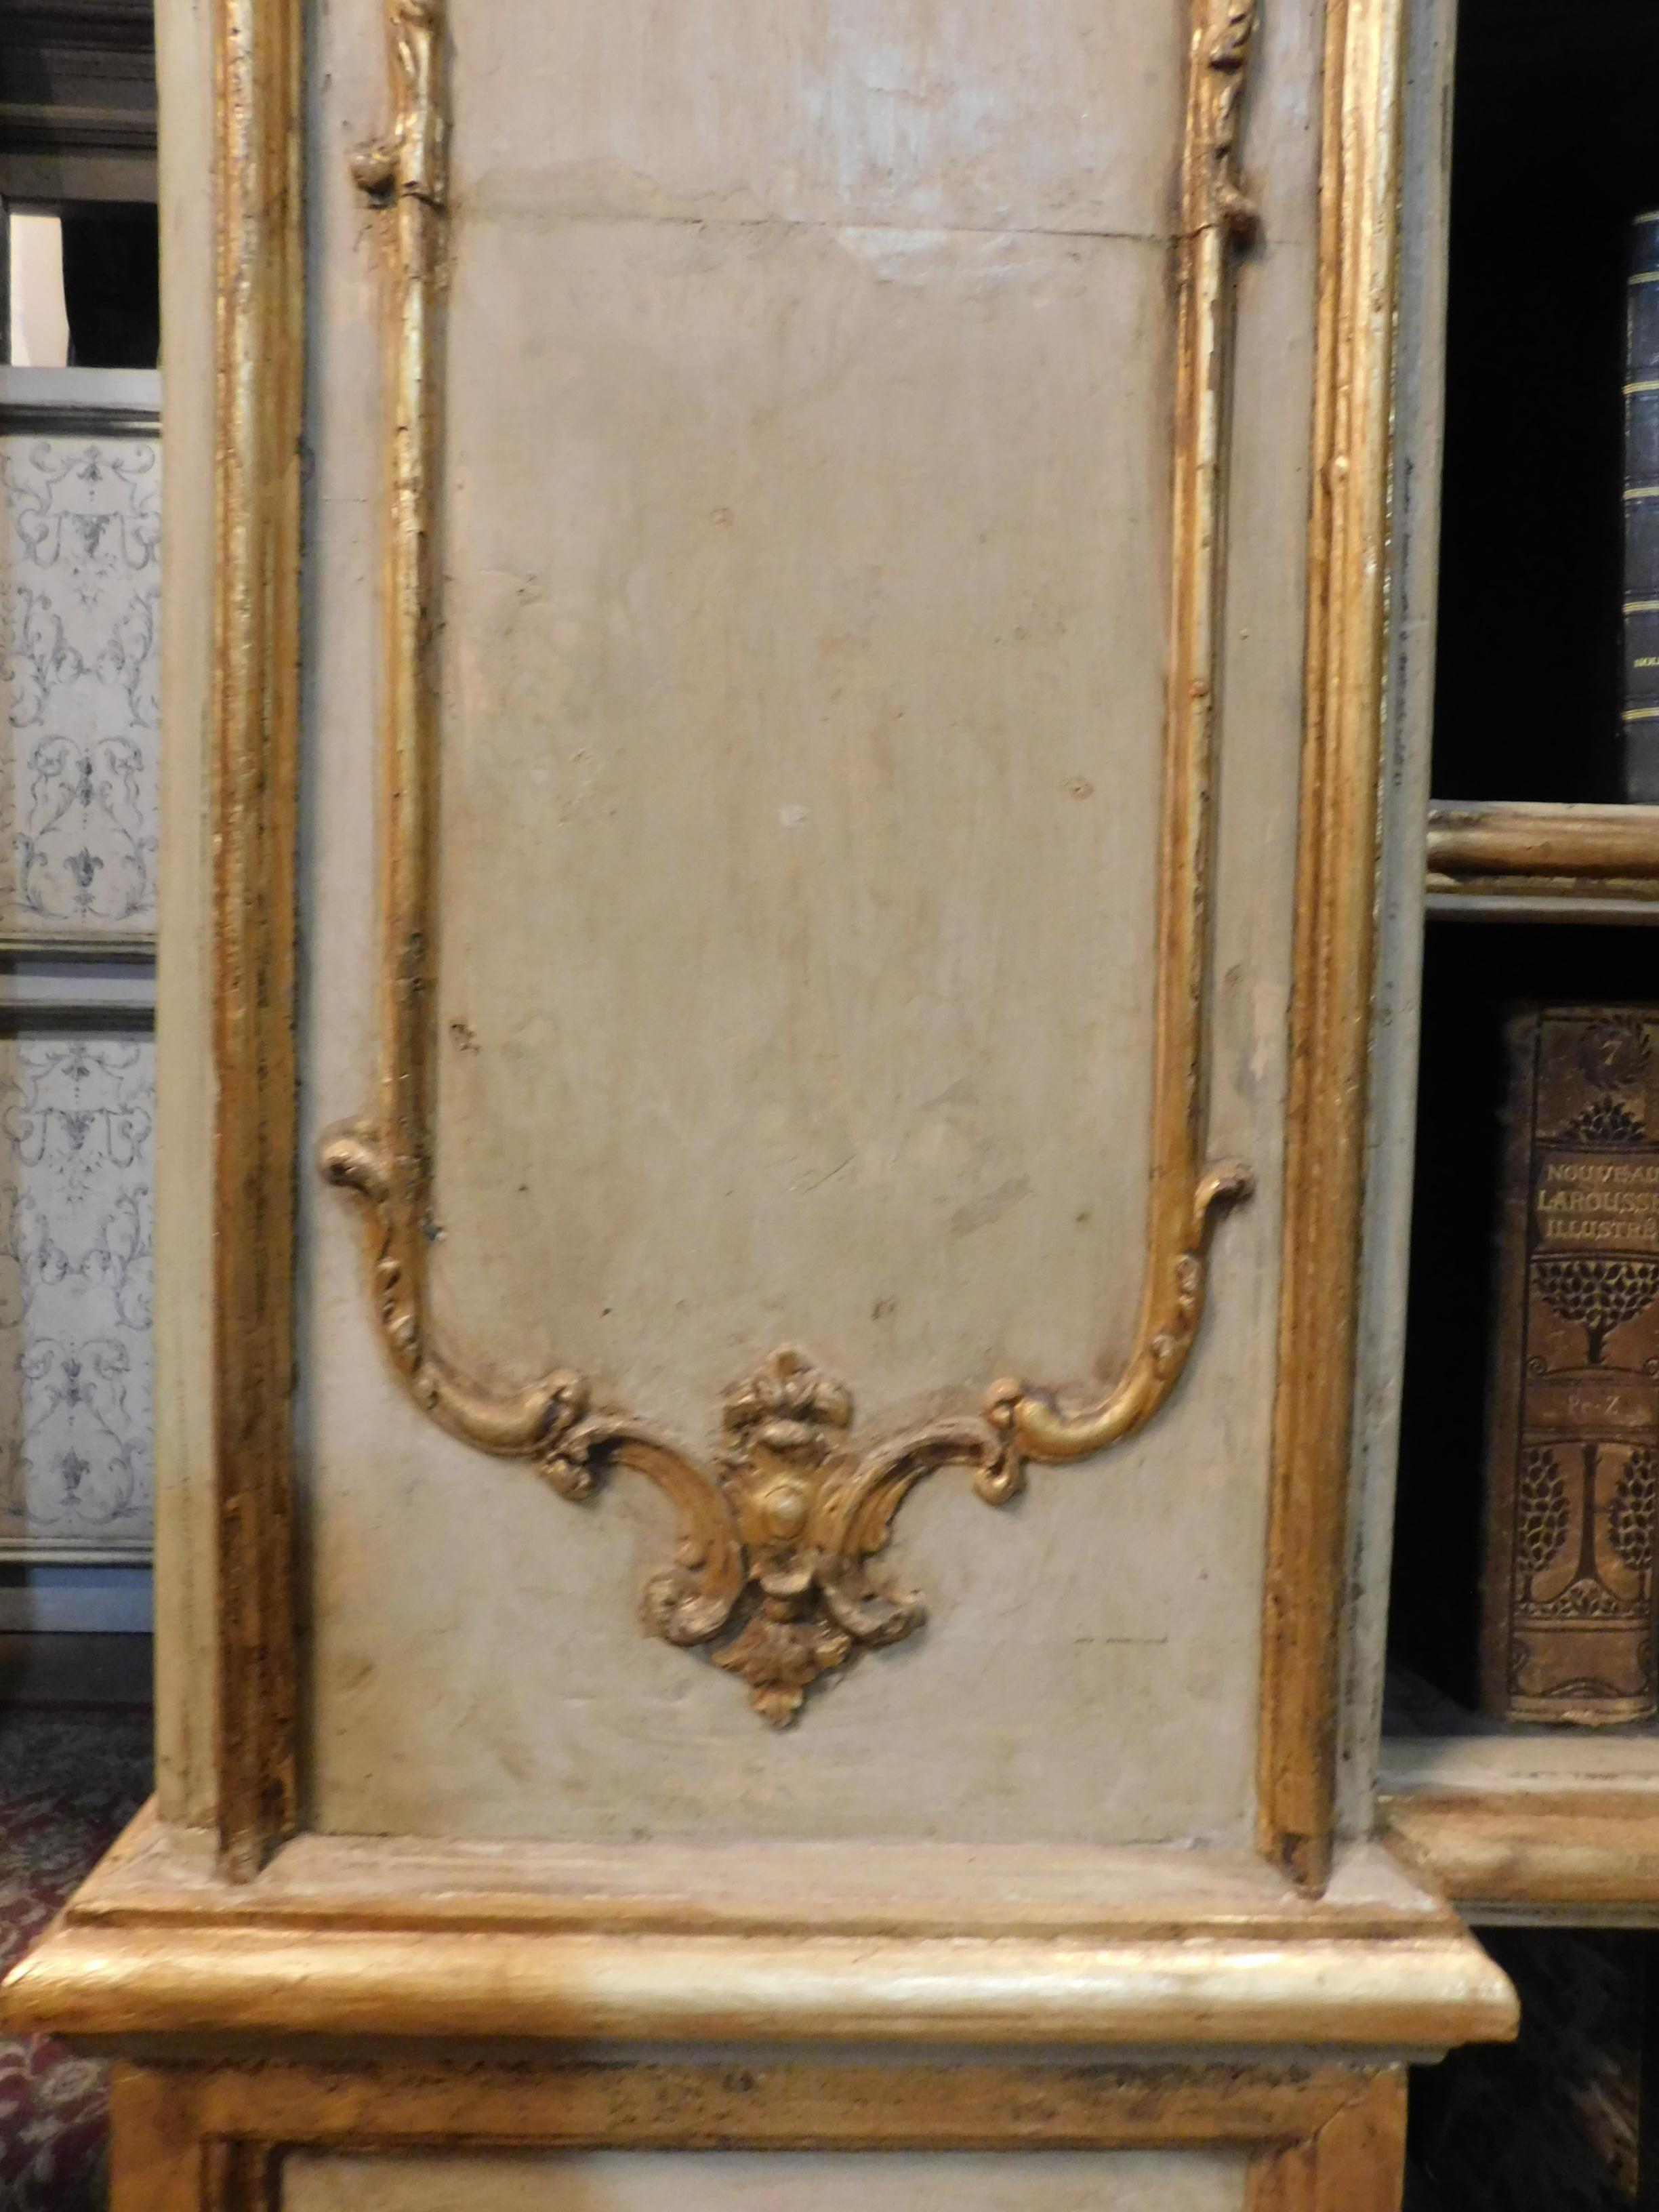 Italian Antique Lacquered Gilded Bookcase, Carved Columns & Friezes, 19th Century Italy For Sale